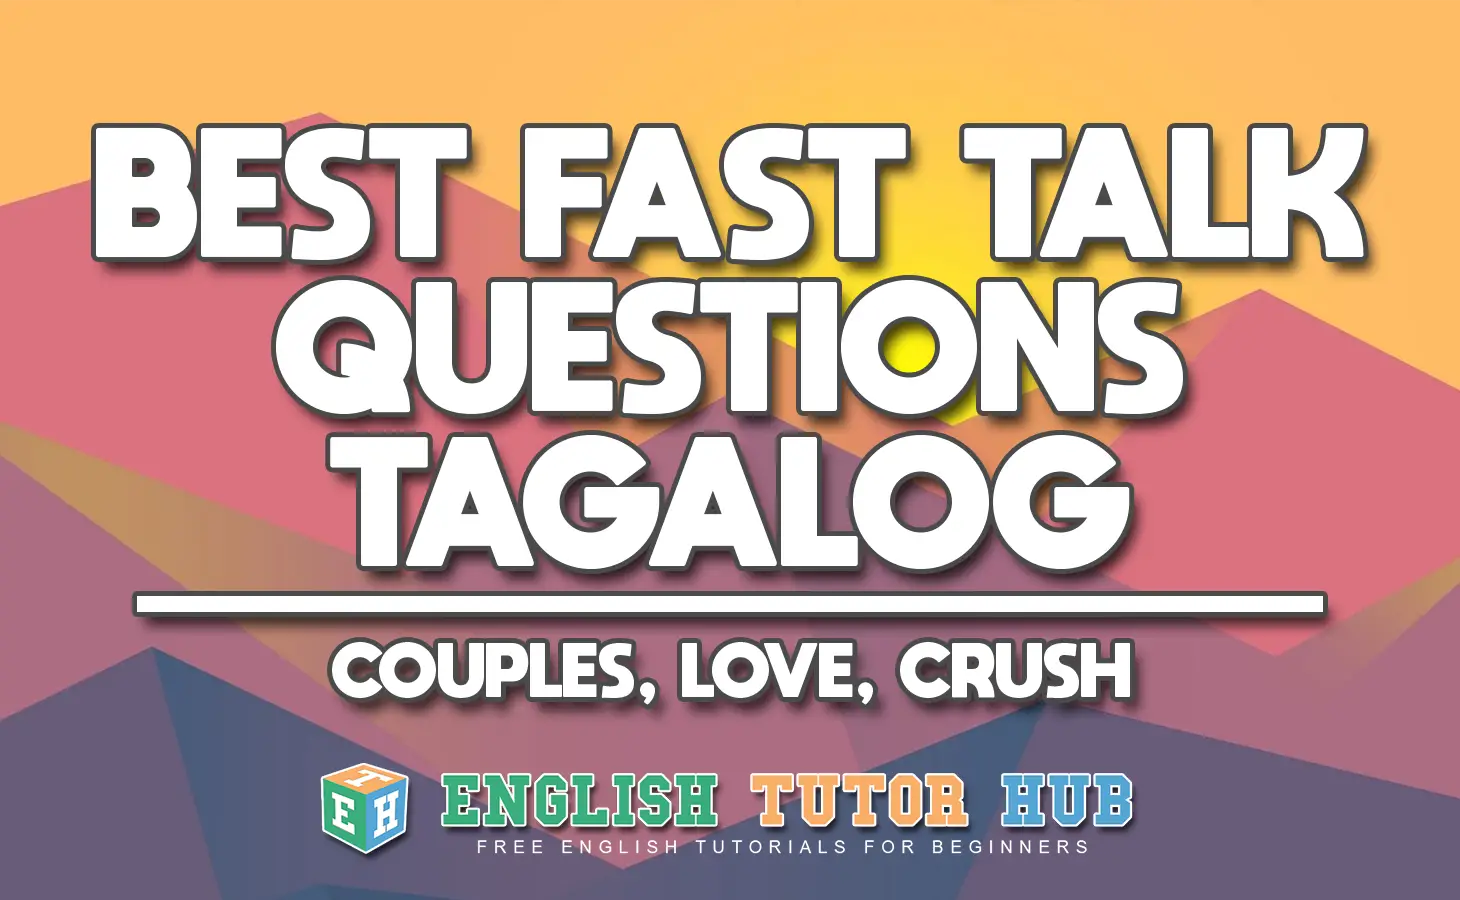 Best Fast Talk Questions Tagalog - Couples, Love, Crush